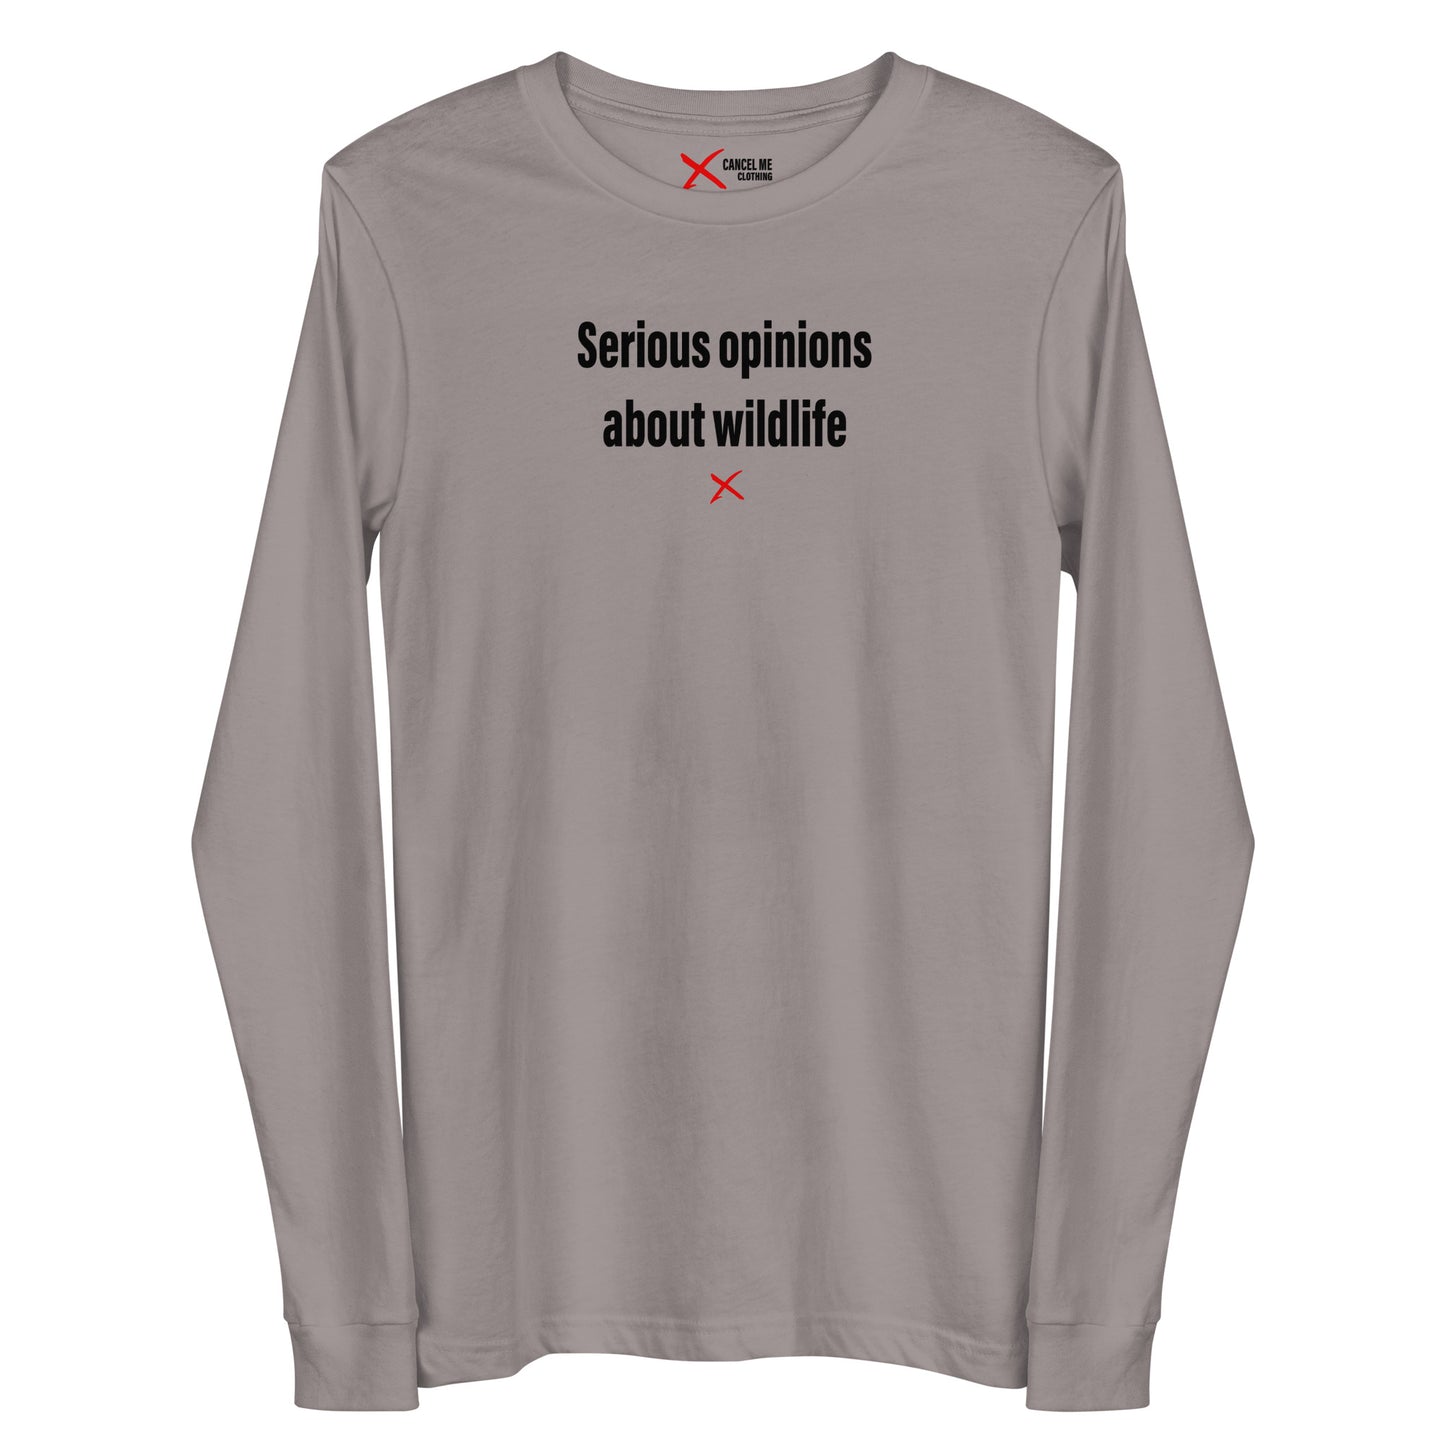 Serious opinions about wildlife - Longsleeve